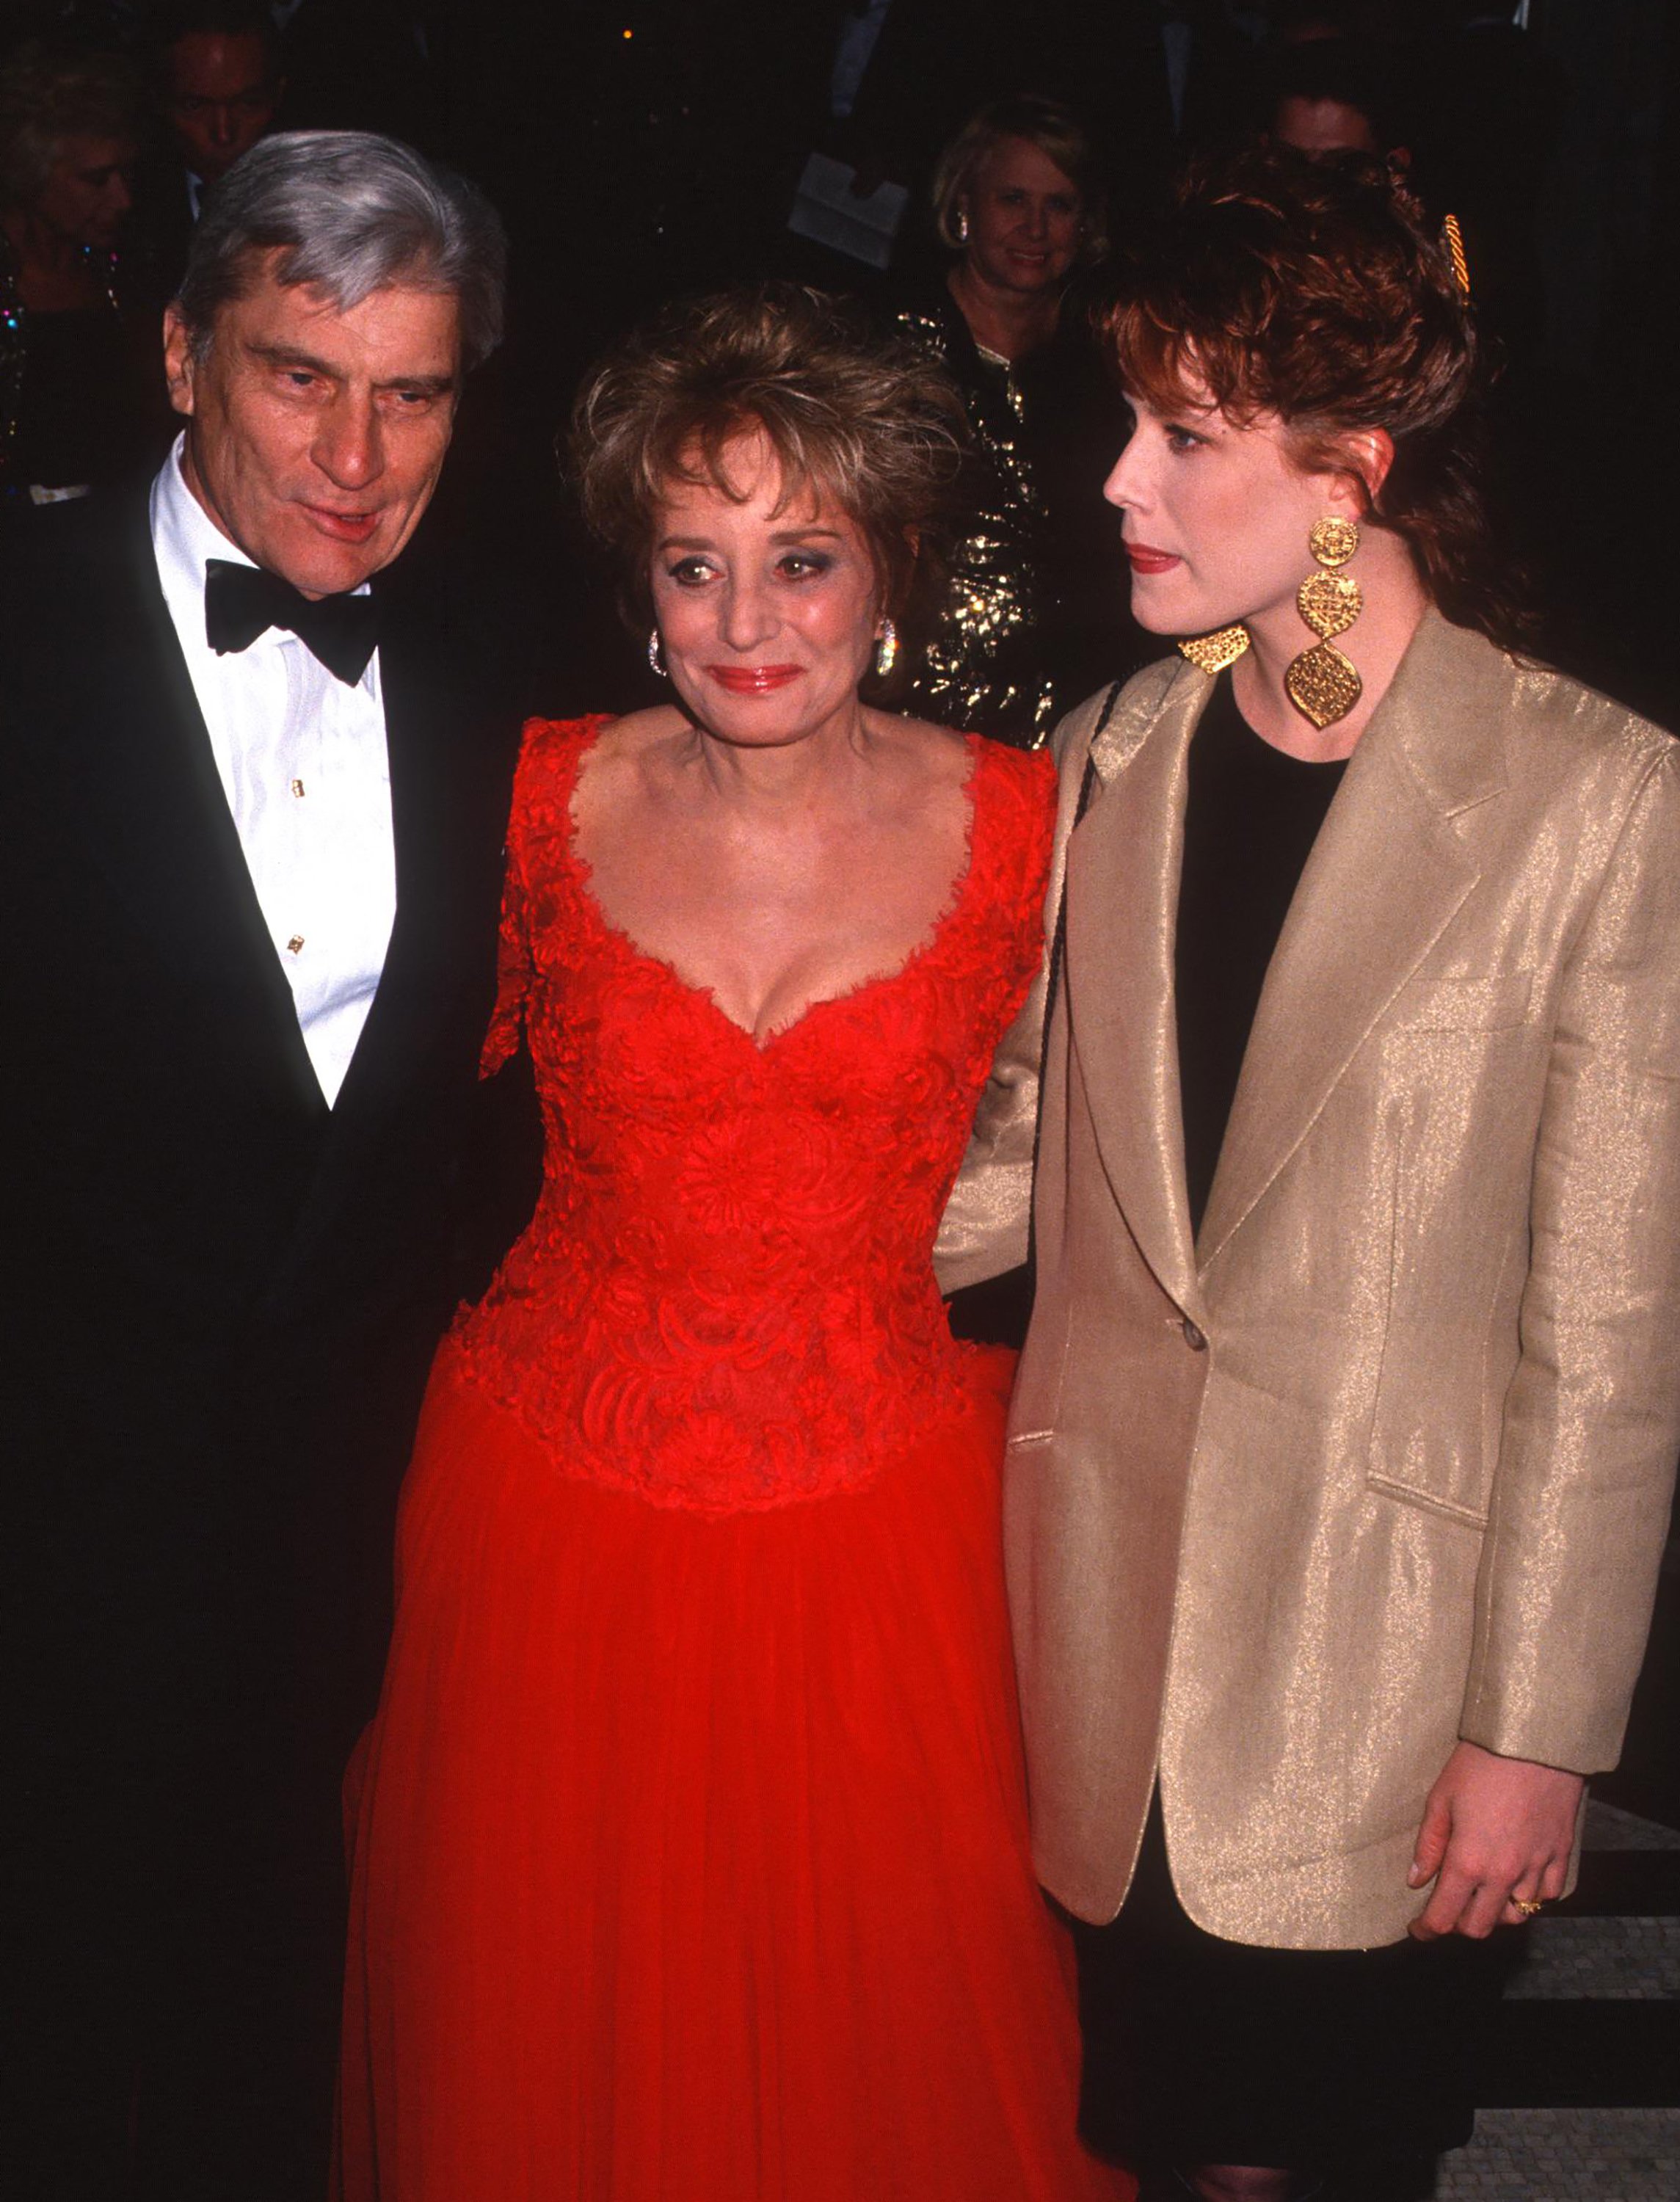 John Warner, Barbara Walters and daughter Jacqueline attend American Museum of the Moving Image Awards Honoring Barbara Walters in New York City on March 19, 1992. | Source: Getty Images